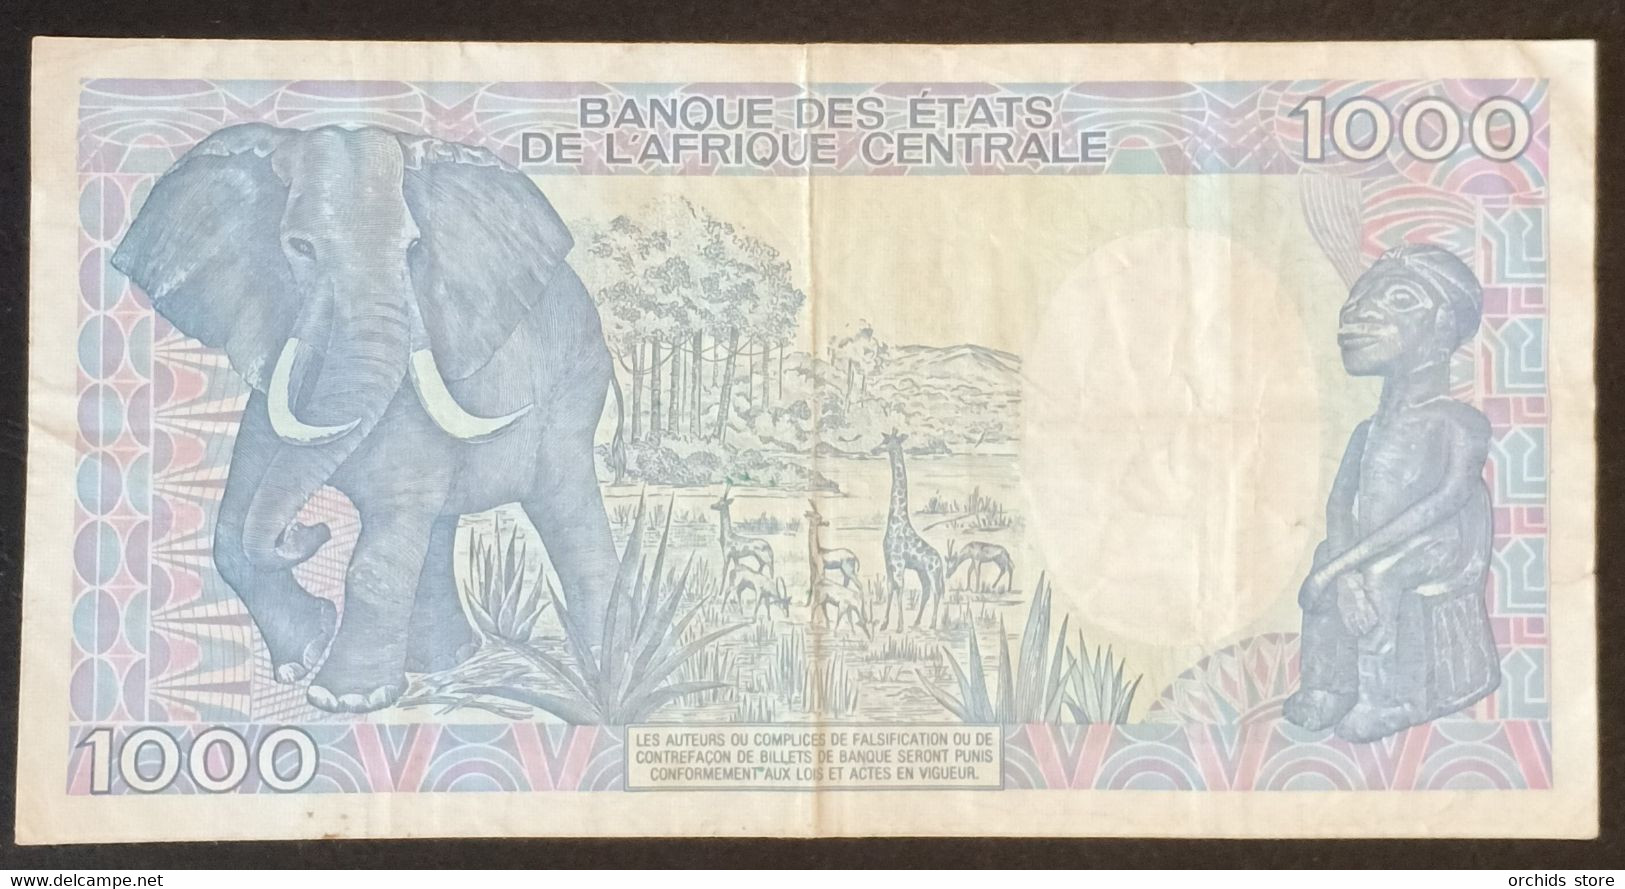 AC2020 - Chad 1991 Banknote 1000 Francs KEY DATE Rare Find - Tschad